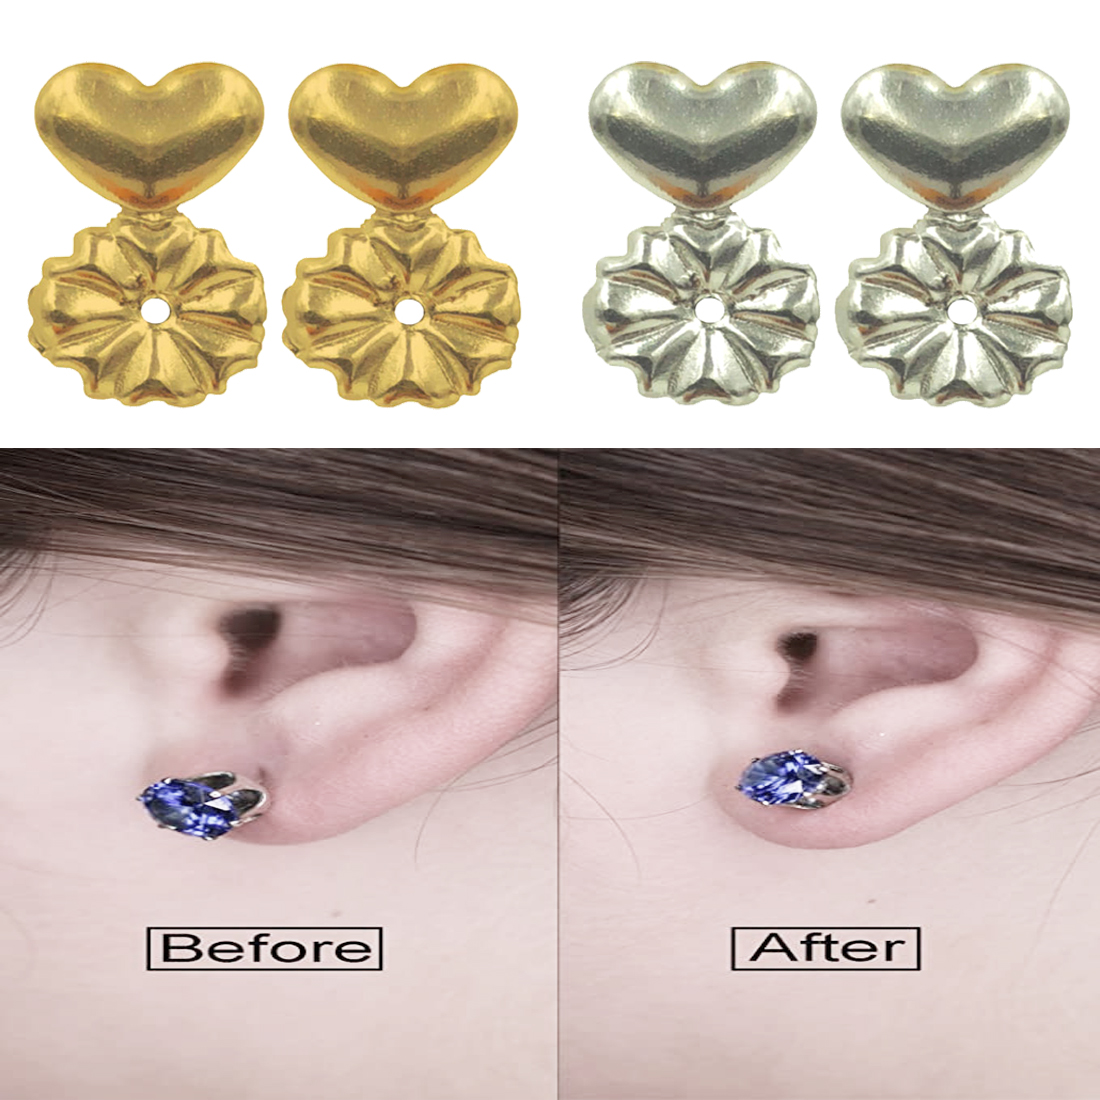 Toqueen Womens Earring Lifters - 2 Pairs of Adjustable Hypoallergenic Earring Lifts